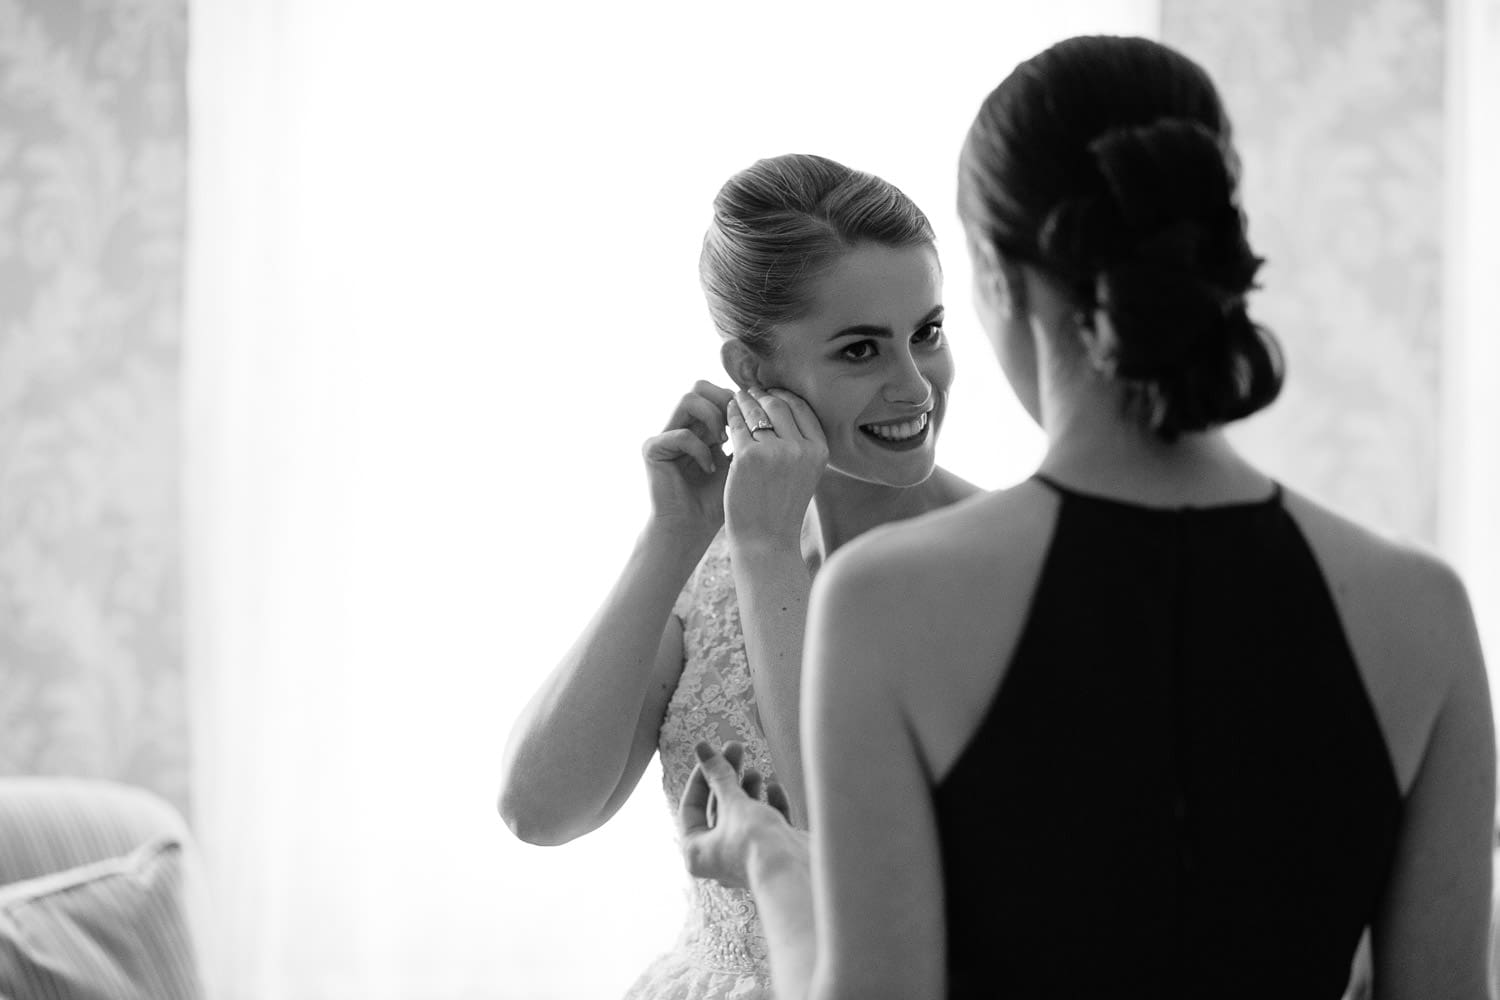 Getting ready for the wedding at home in Hingham, MA | Kelly Benvenuto Photography | Boston wedding photographer